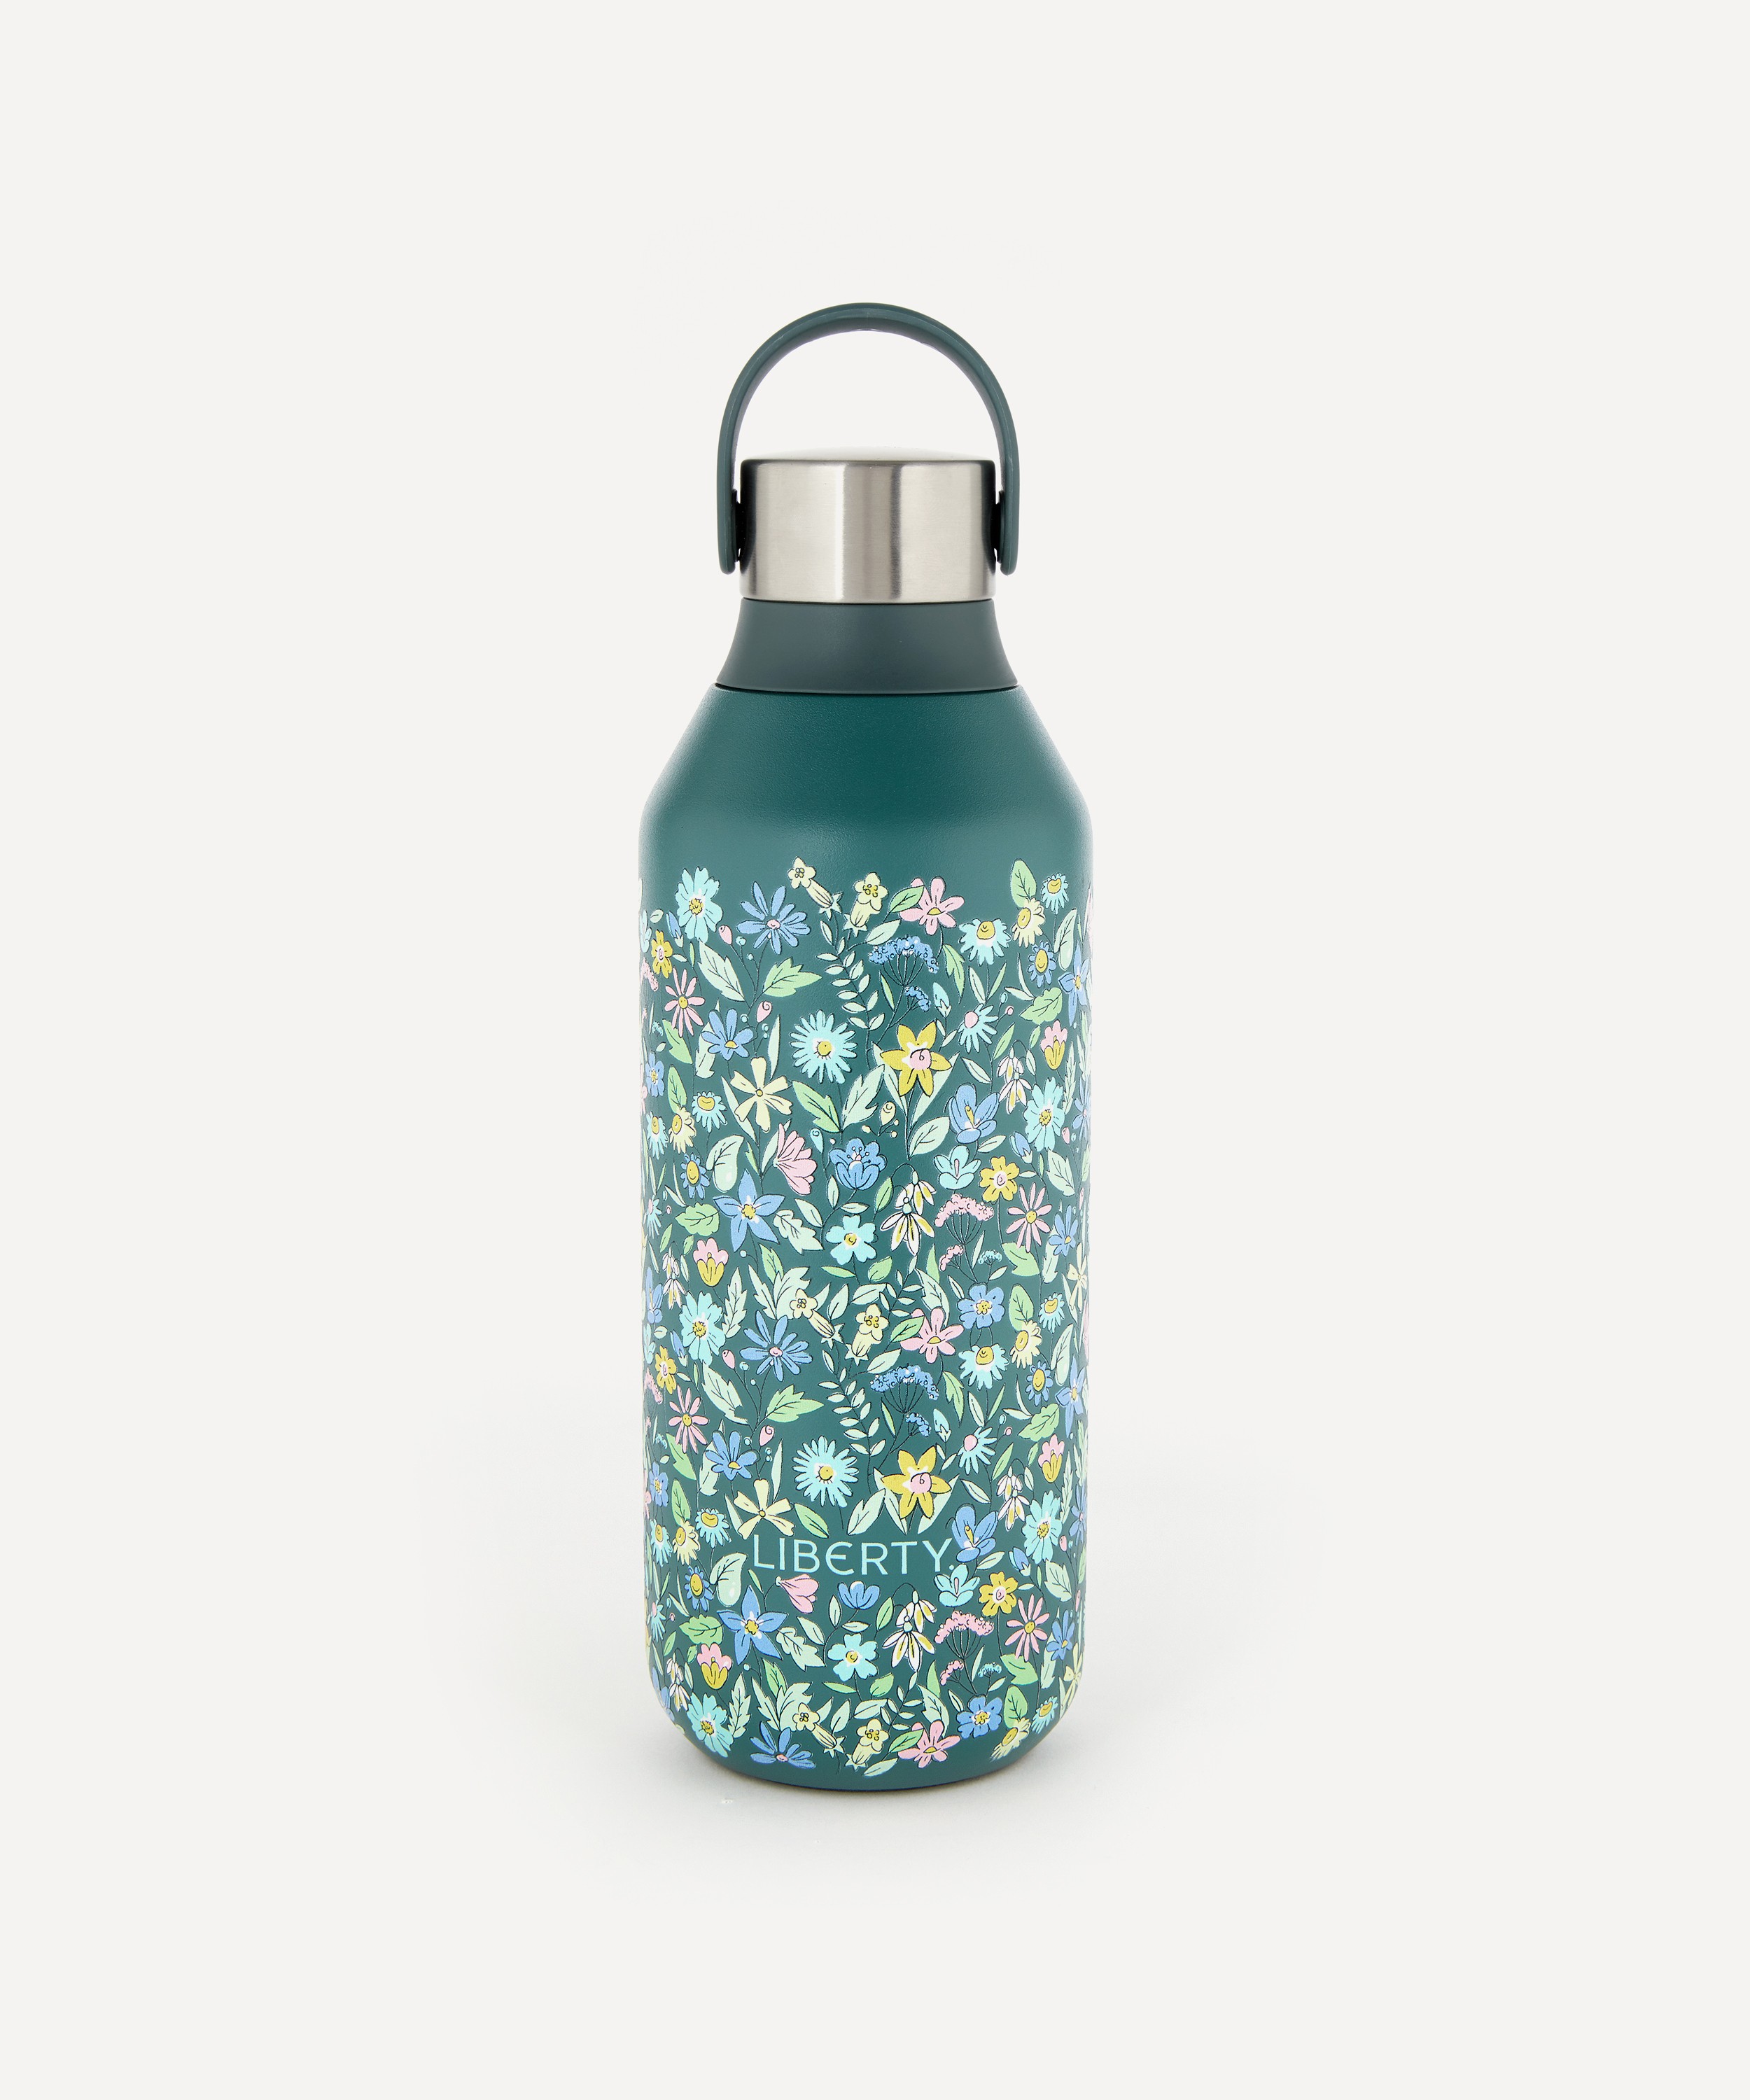 Herald x Chillys Bottle (Large) 